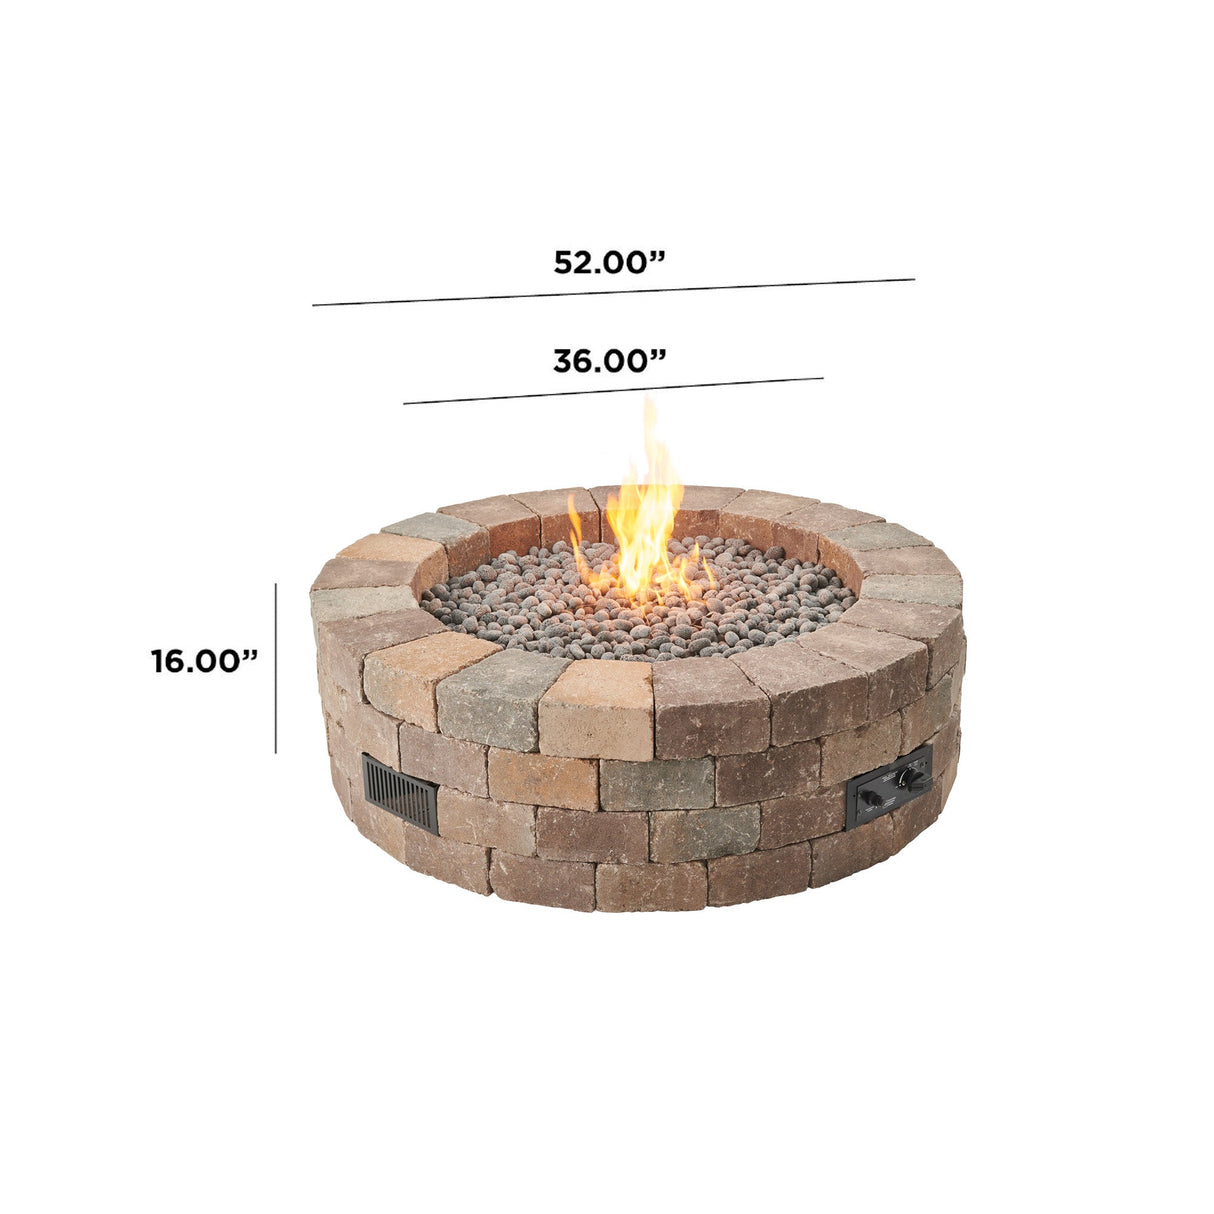 Dimensions overlaid on a Bronson Block Round Gas Fire Pit Kit